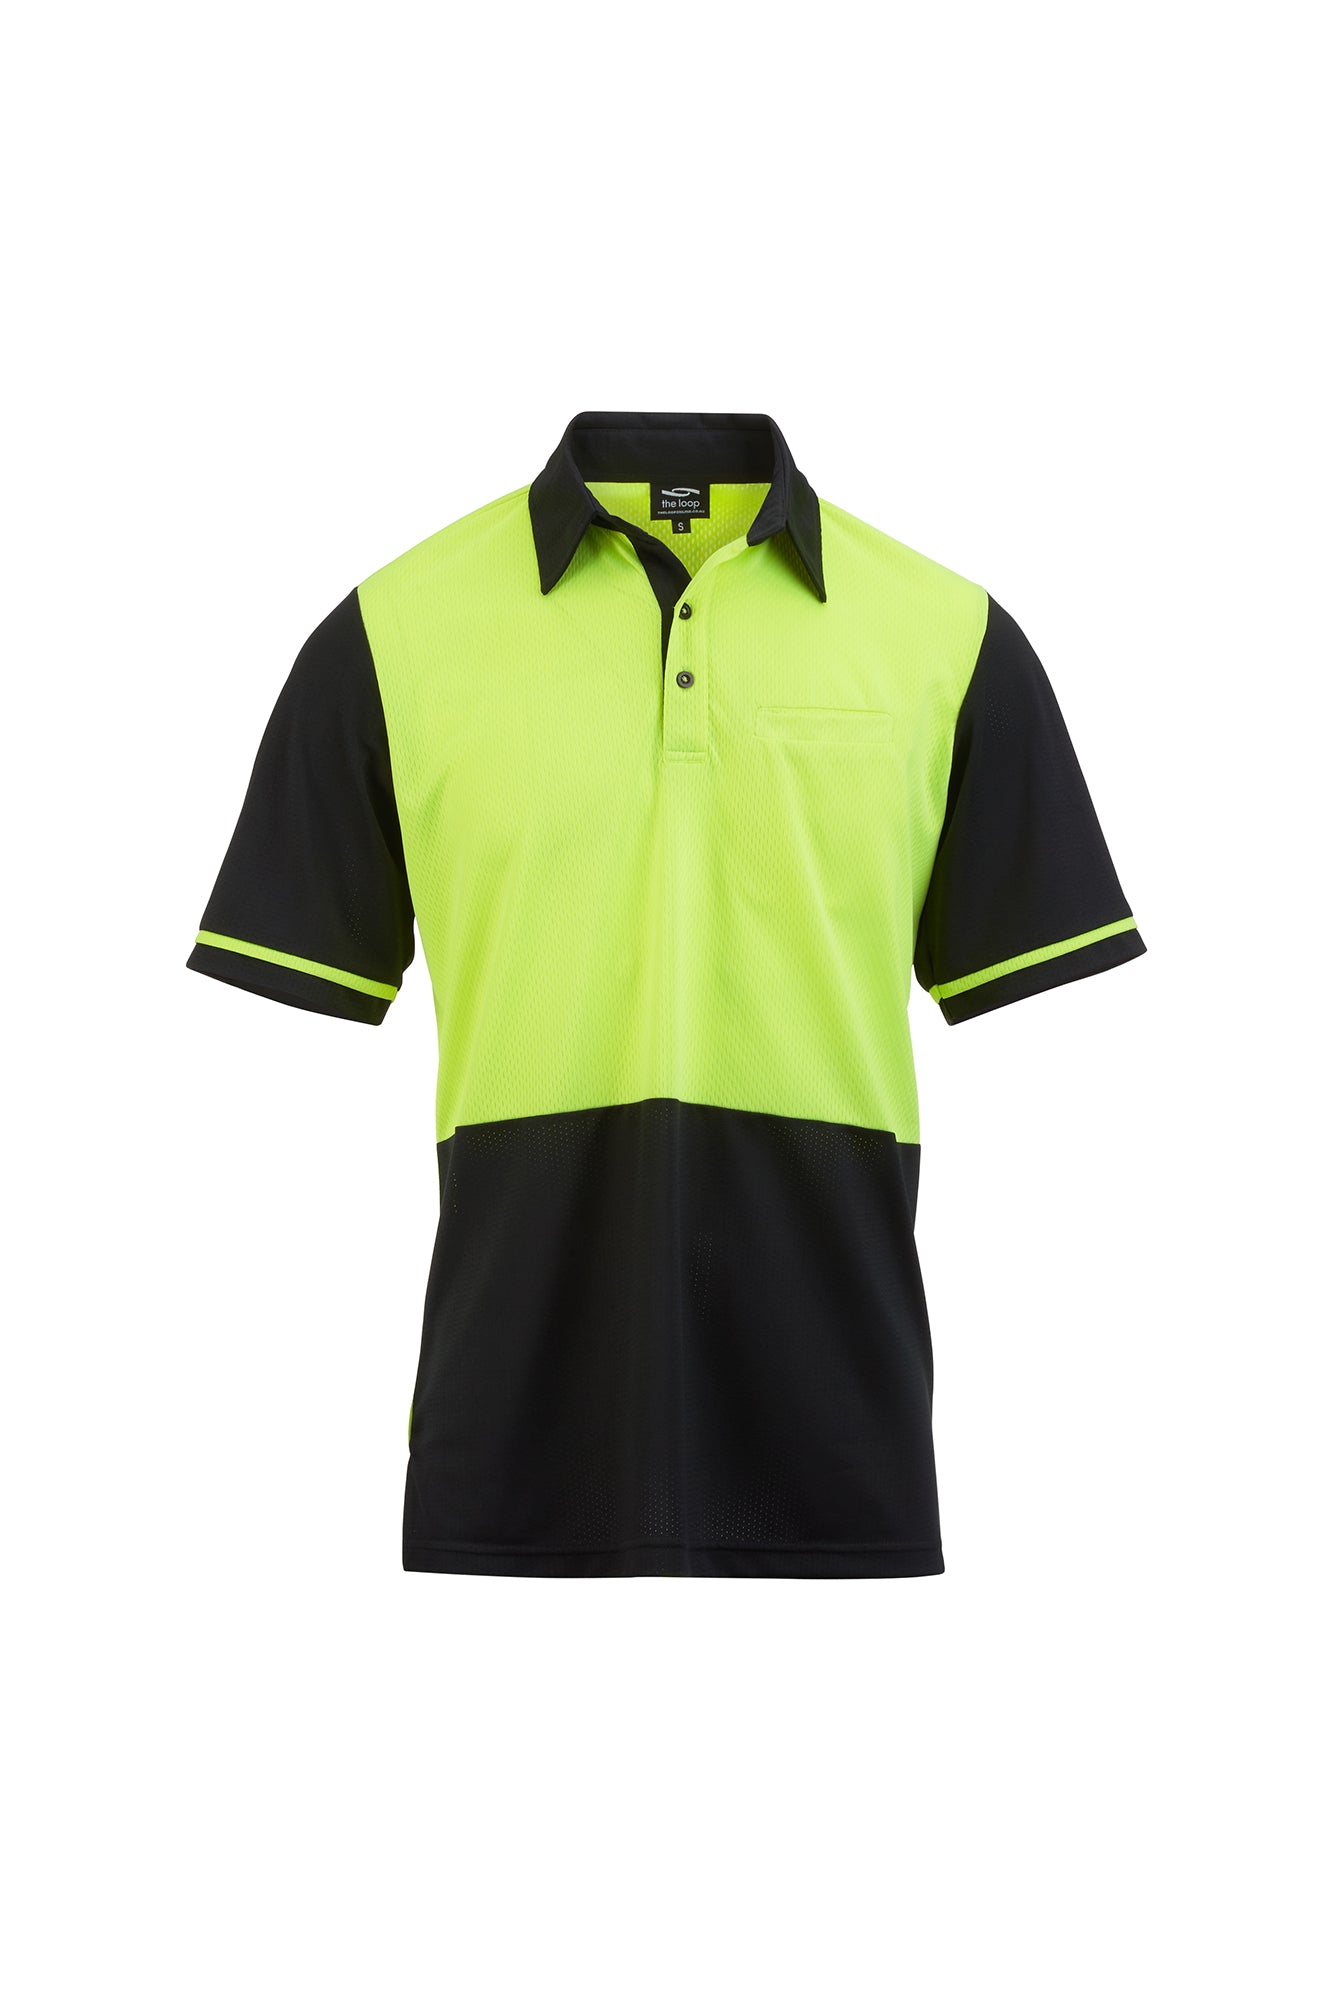 Loop Hi Vis Recycled Polyester Polo